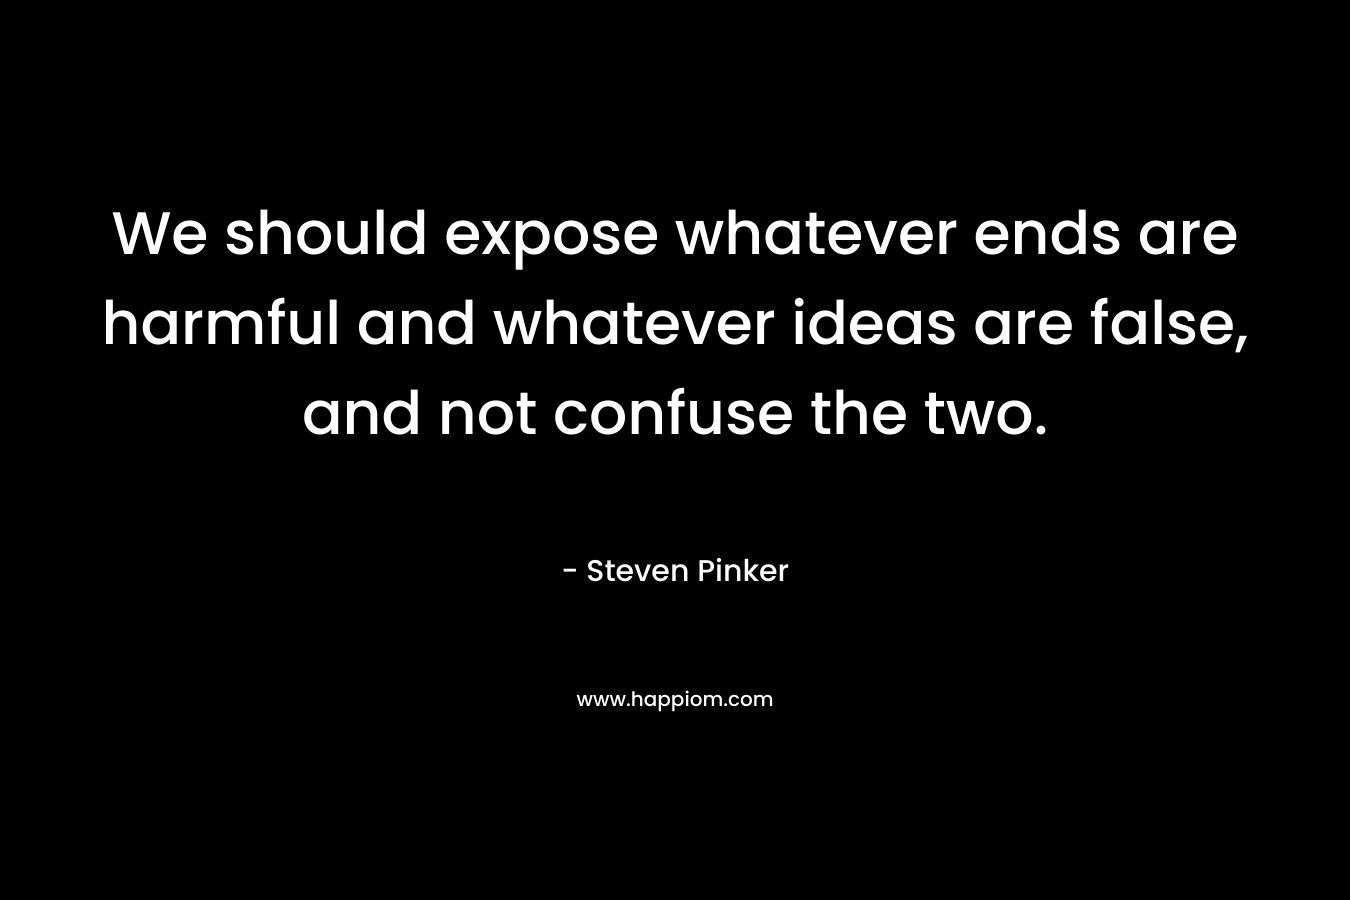 We should expose whatever ends are harmful and whatever ideas are false, and not confuse the two. – Steven Pinker